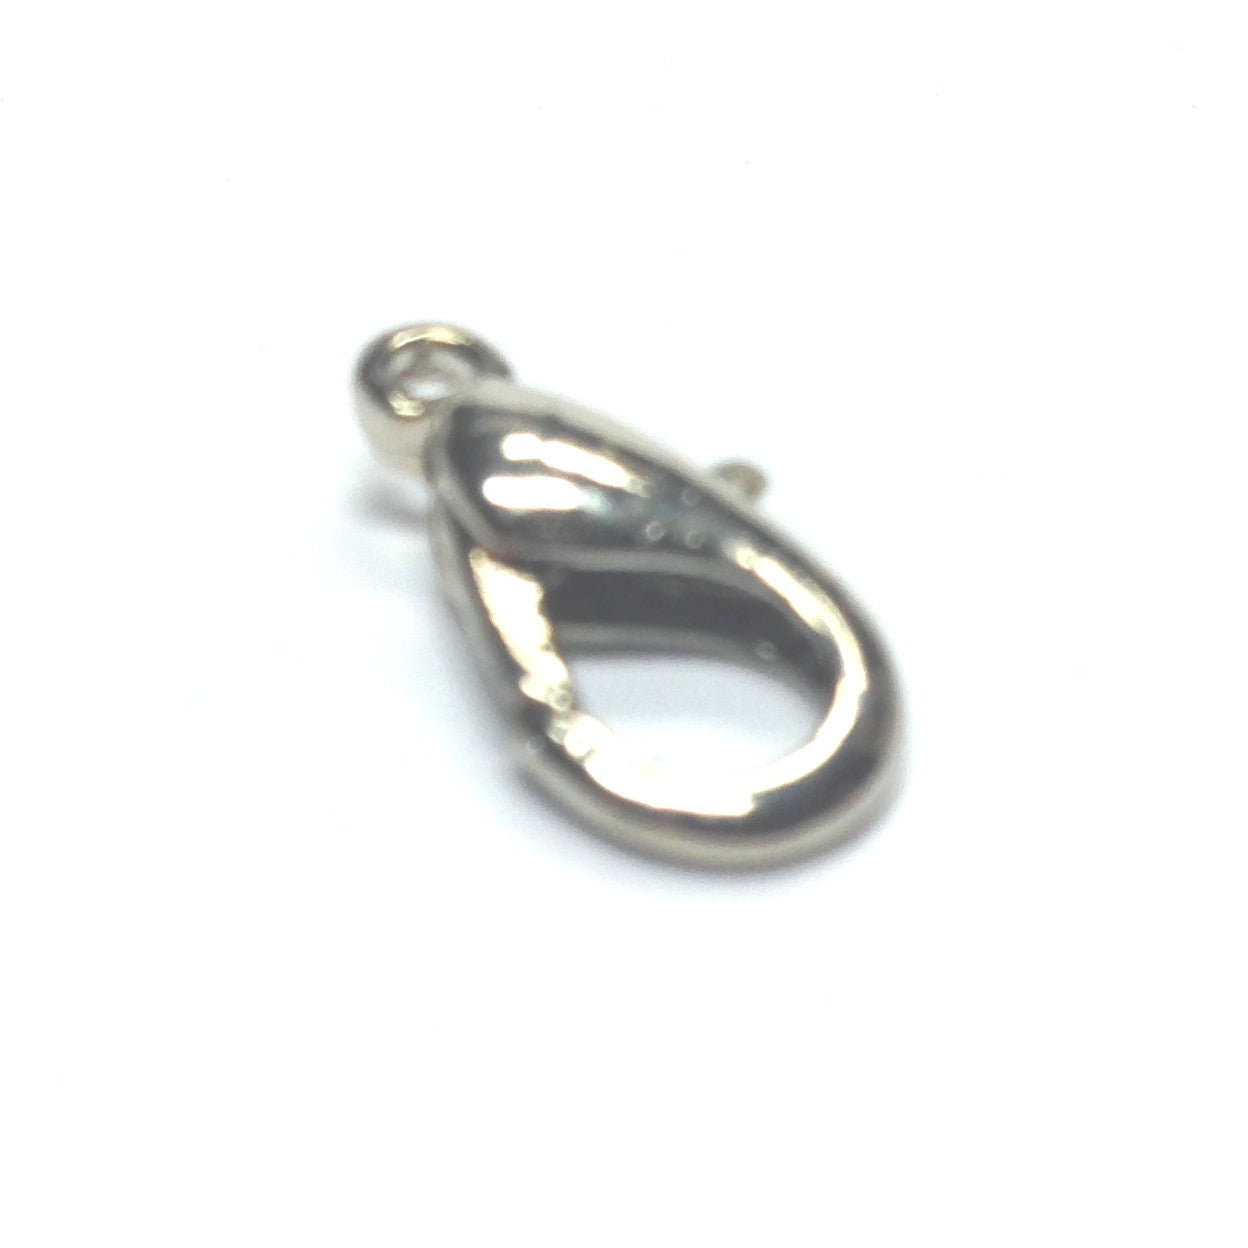 18MM Nickel Lobster Claw Clasp (144 pieces)